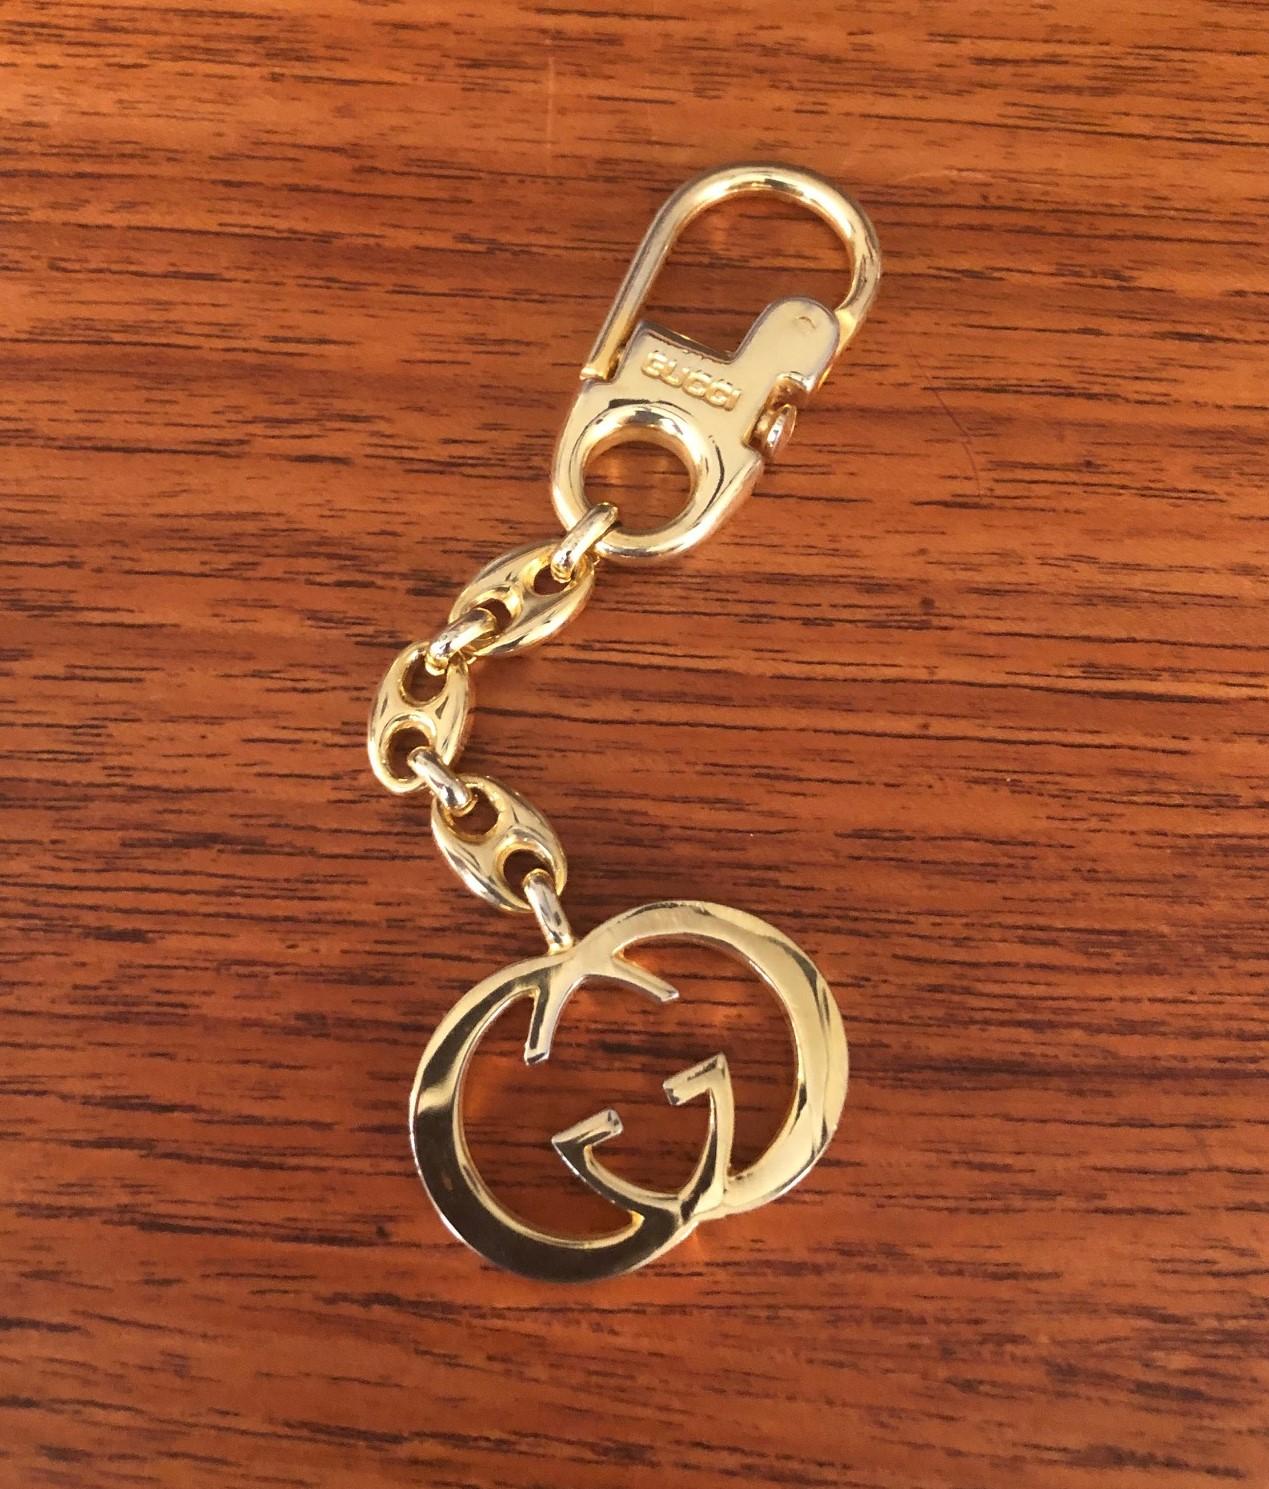 Vintage gold-plated logo keychain by Gucci, circa 1980s. This timeless piece, with interlocking 